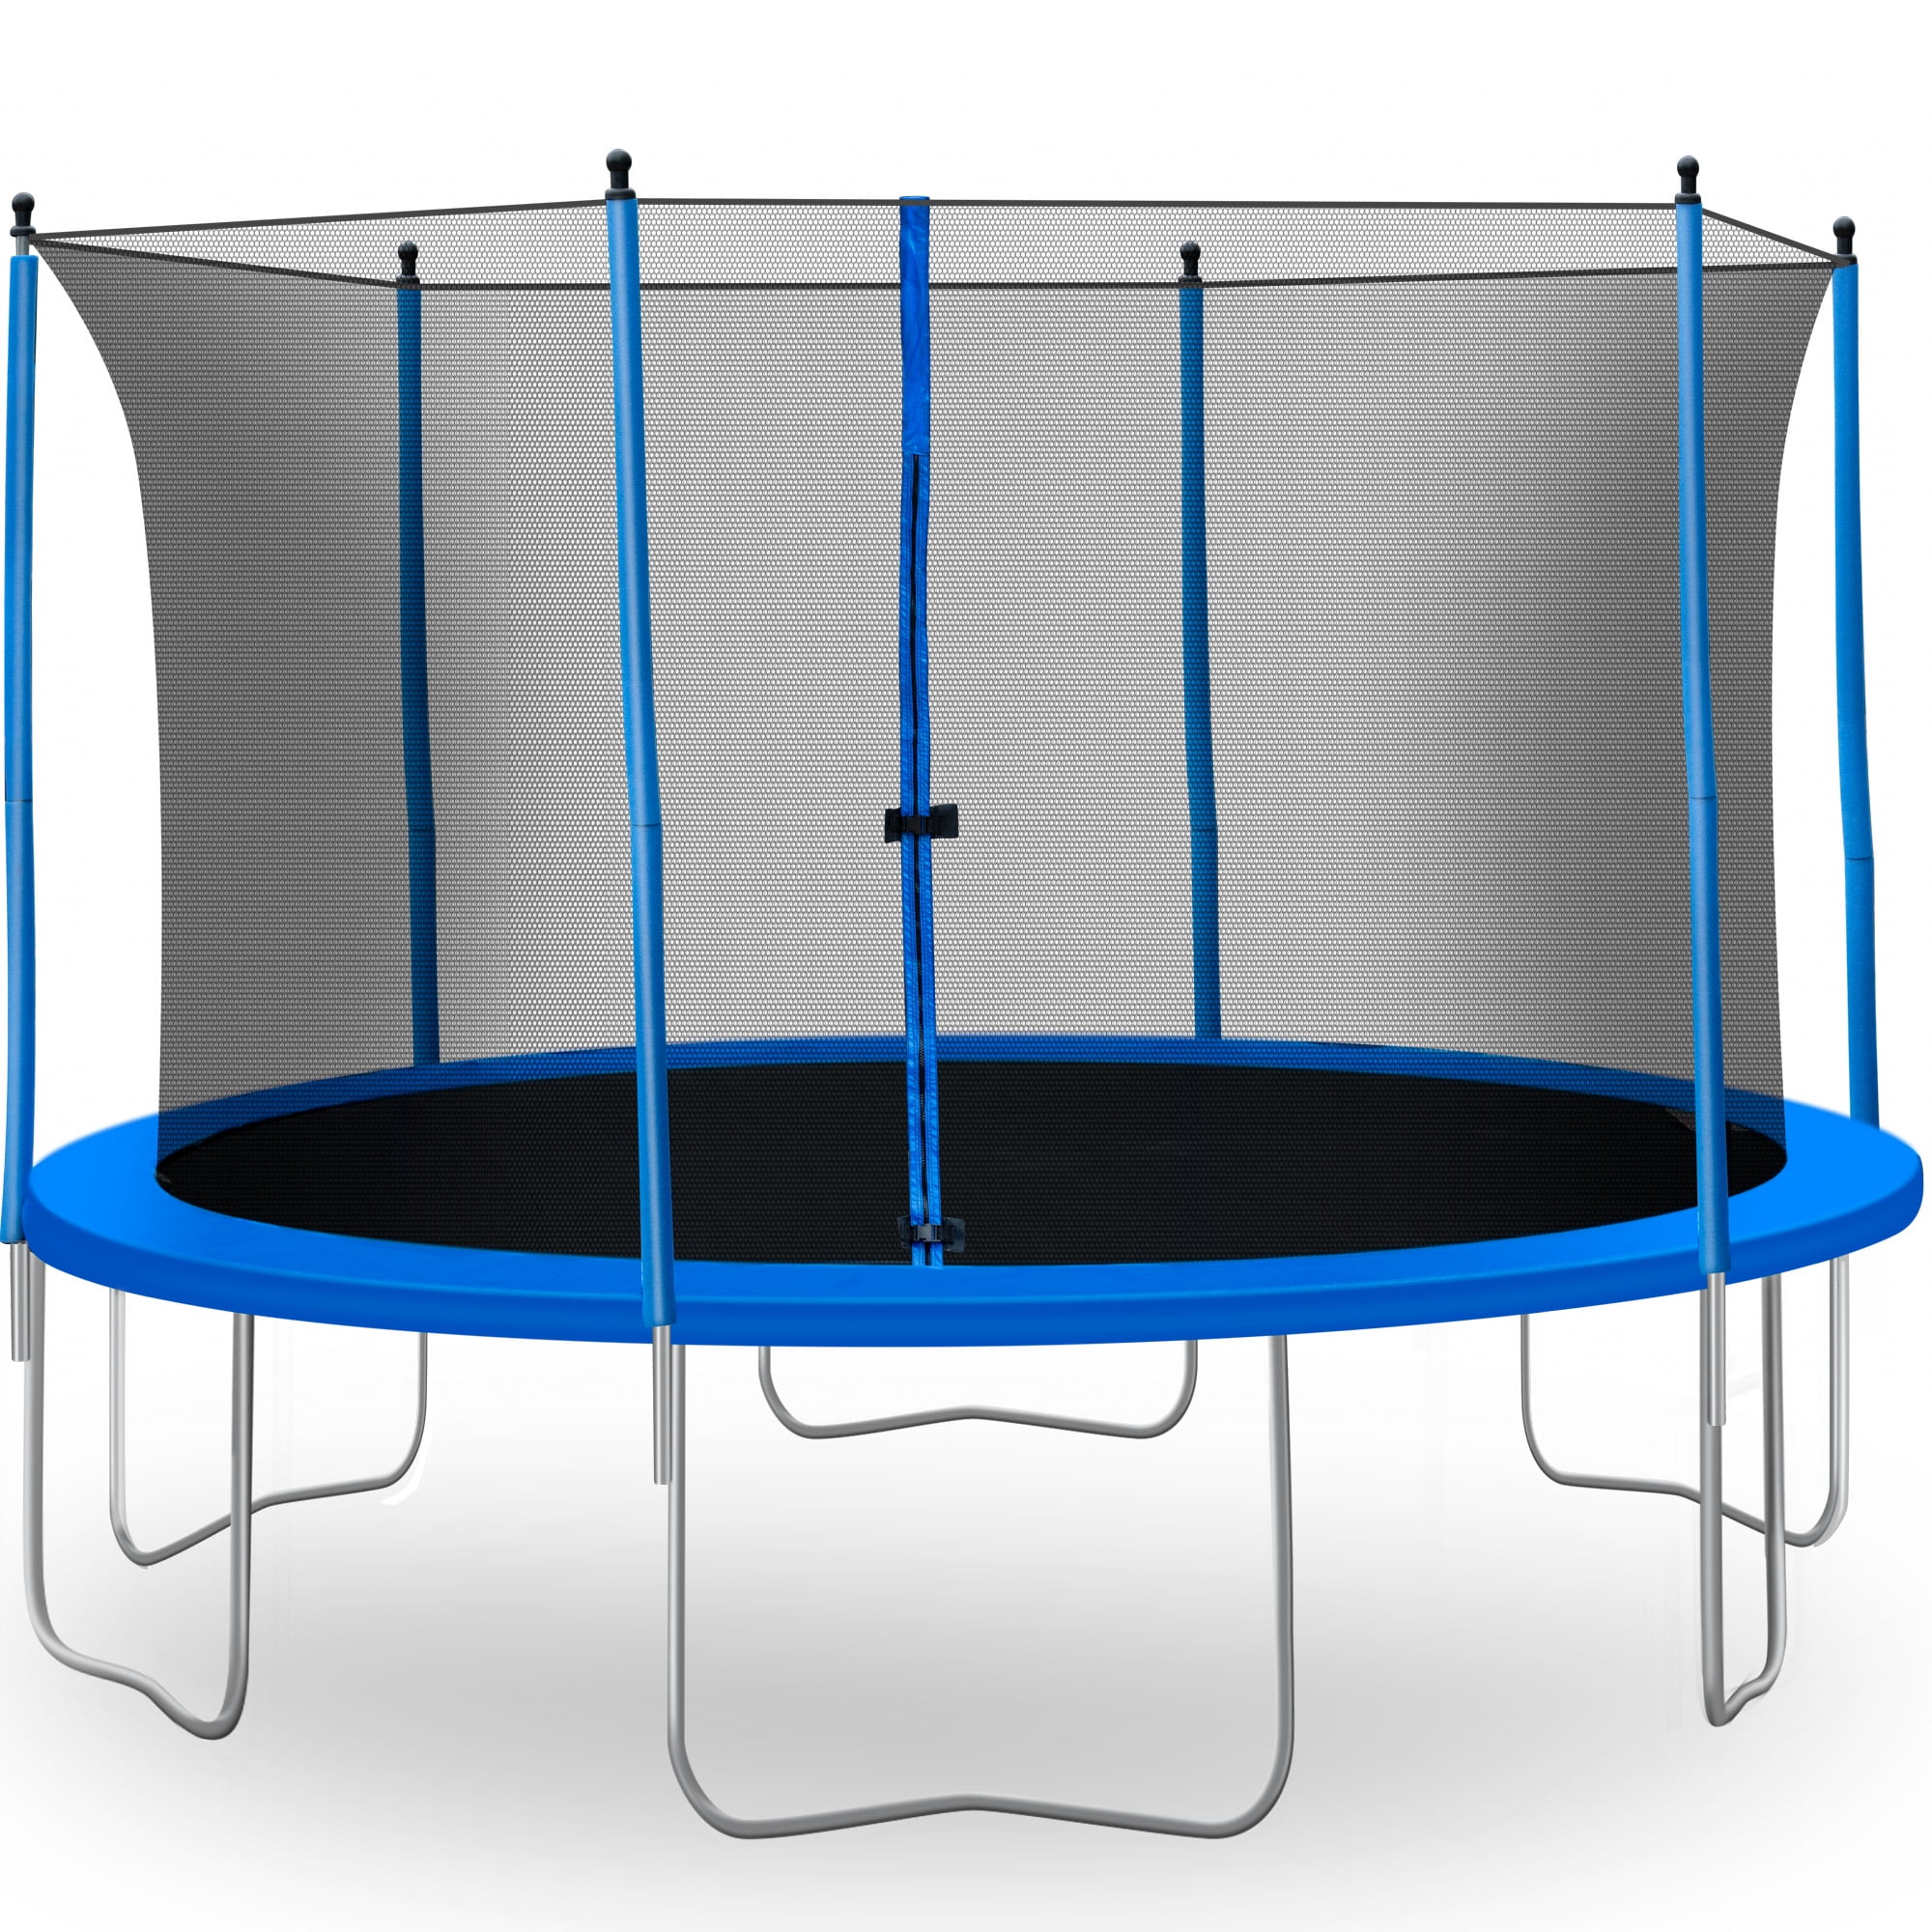 13-Foot Kids Trampoline for Backyard, Outdoor Trampoline with Safety Enclosure Net, Steel Tube, Circular Trampolines for Adults Kids, Family Jumping and Ladder, Kids Round Trampoline, Q17172